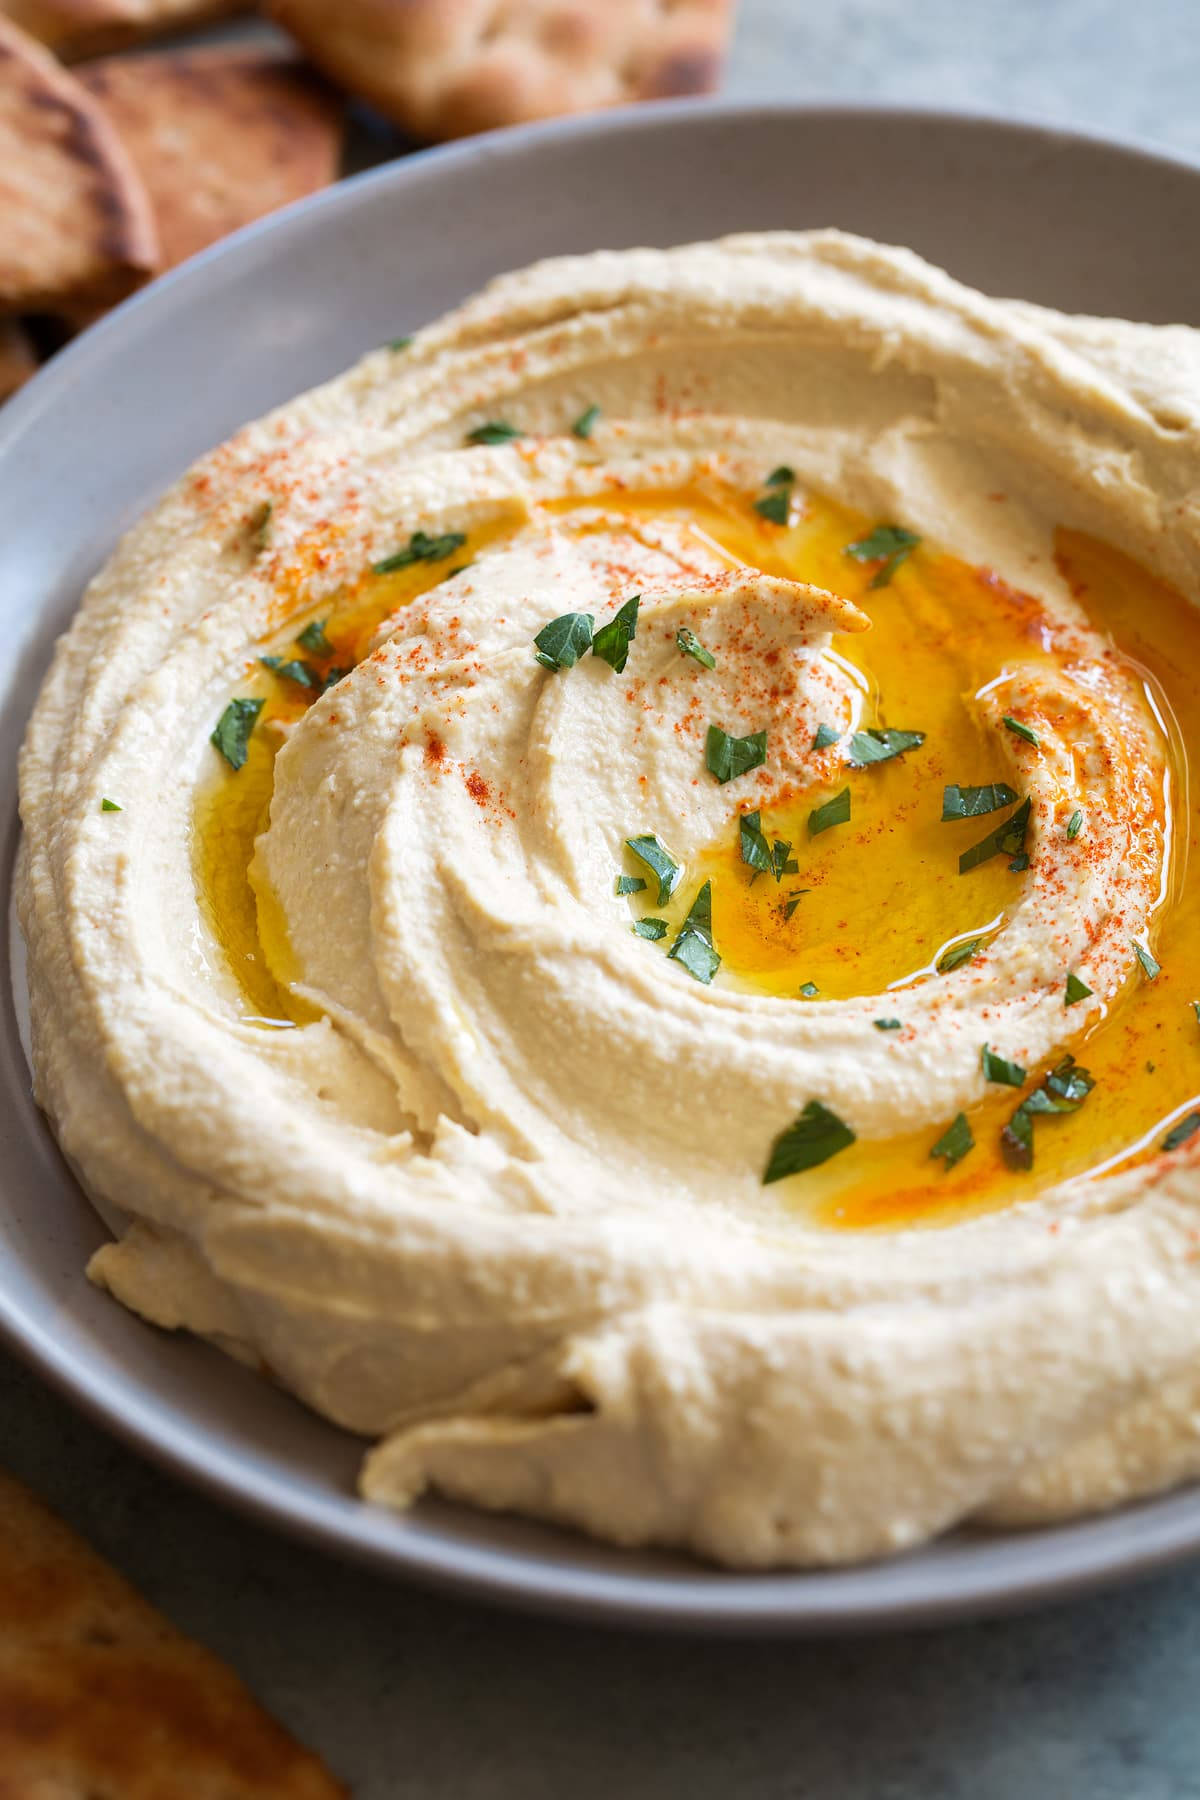 A Delicious Bowl of Creamy Hummus Drizzled with Olive Oil Wallpaper